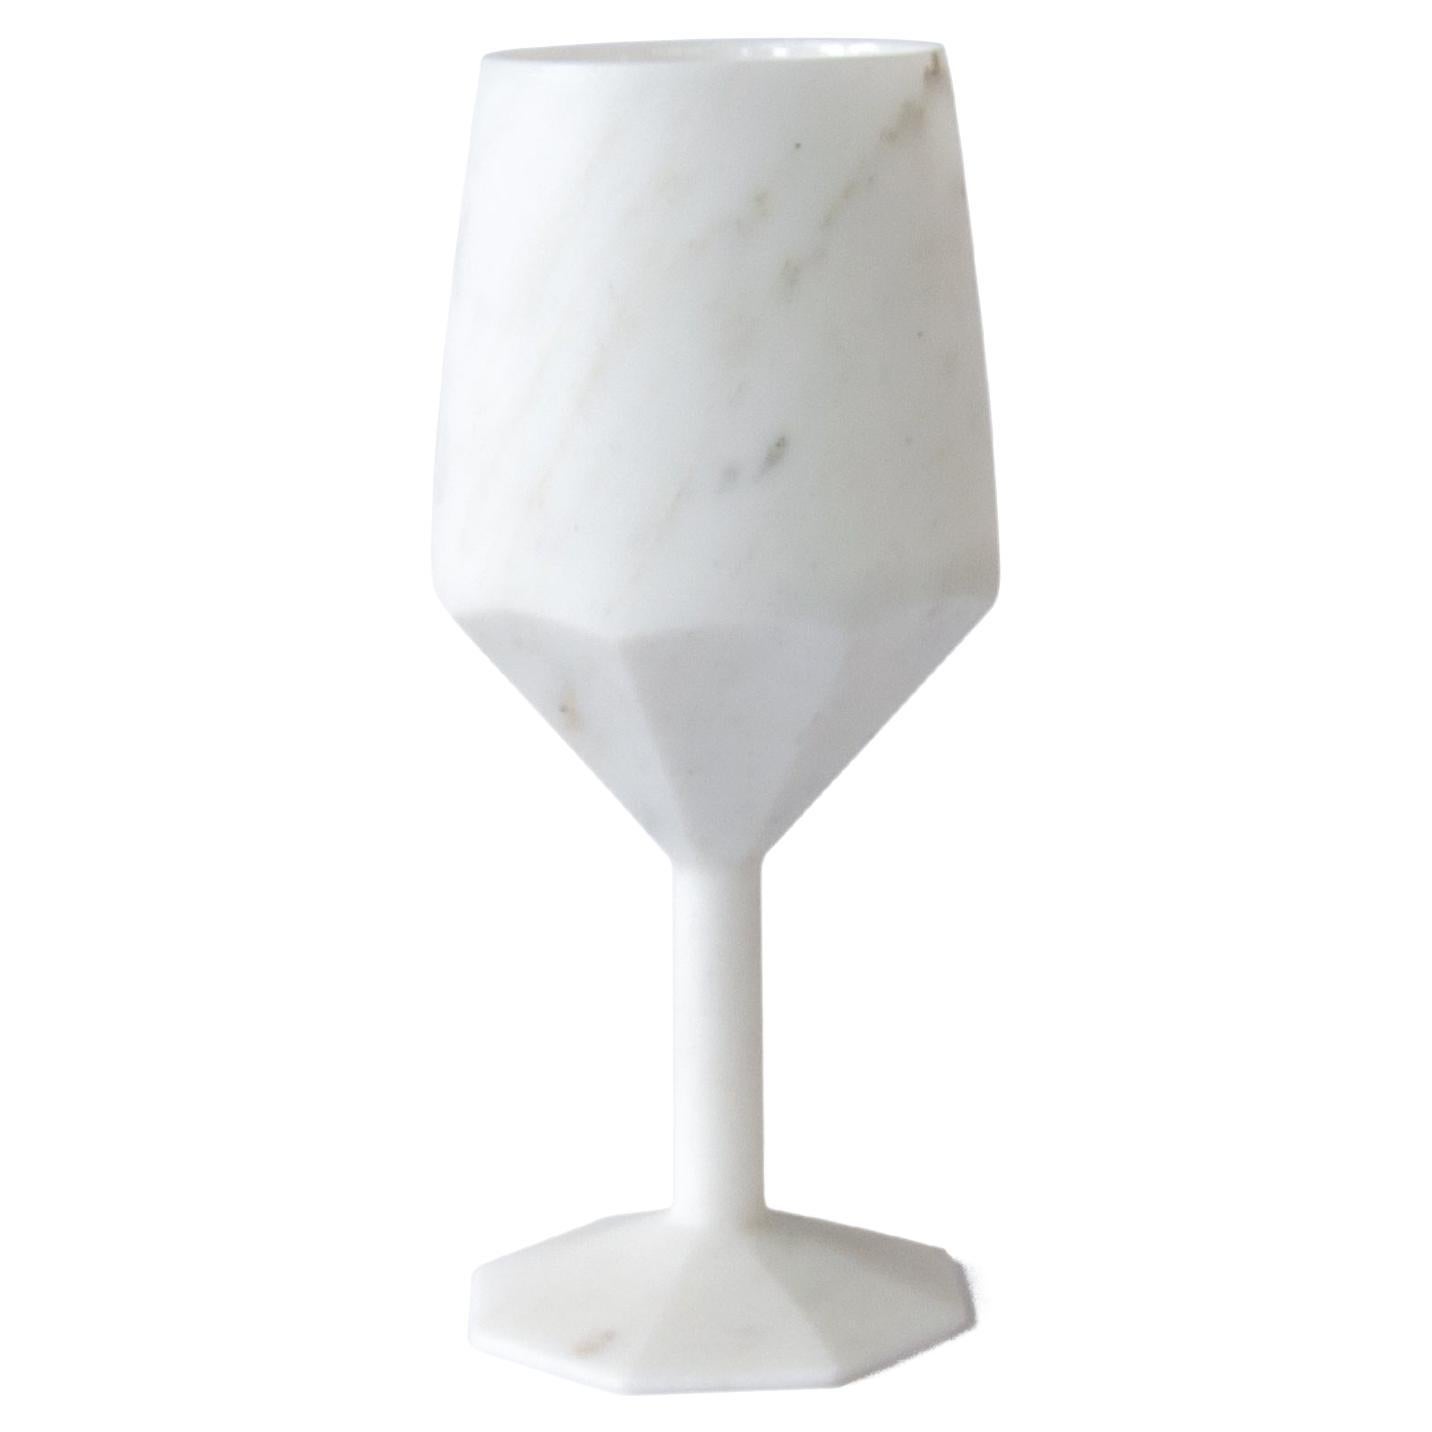 Handmade Cocktail Glass in Satin White Carrara Marble For Sale